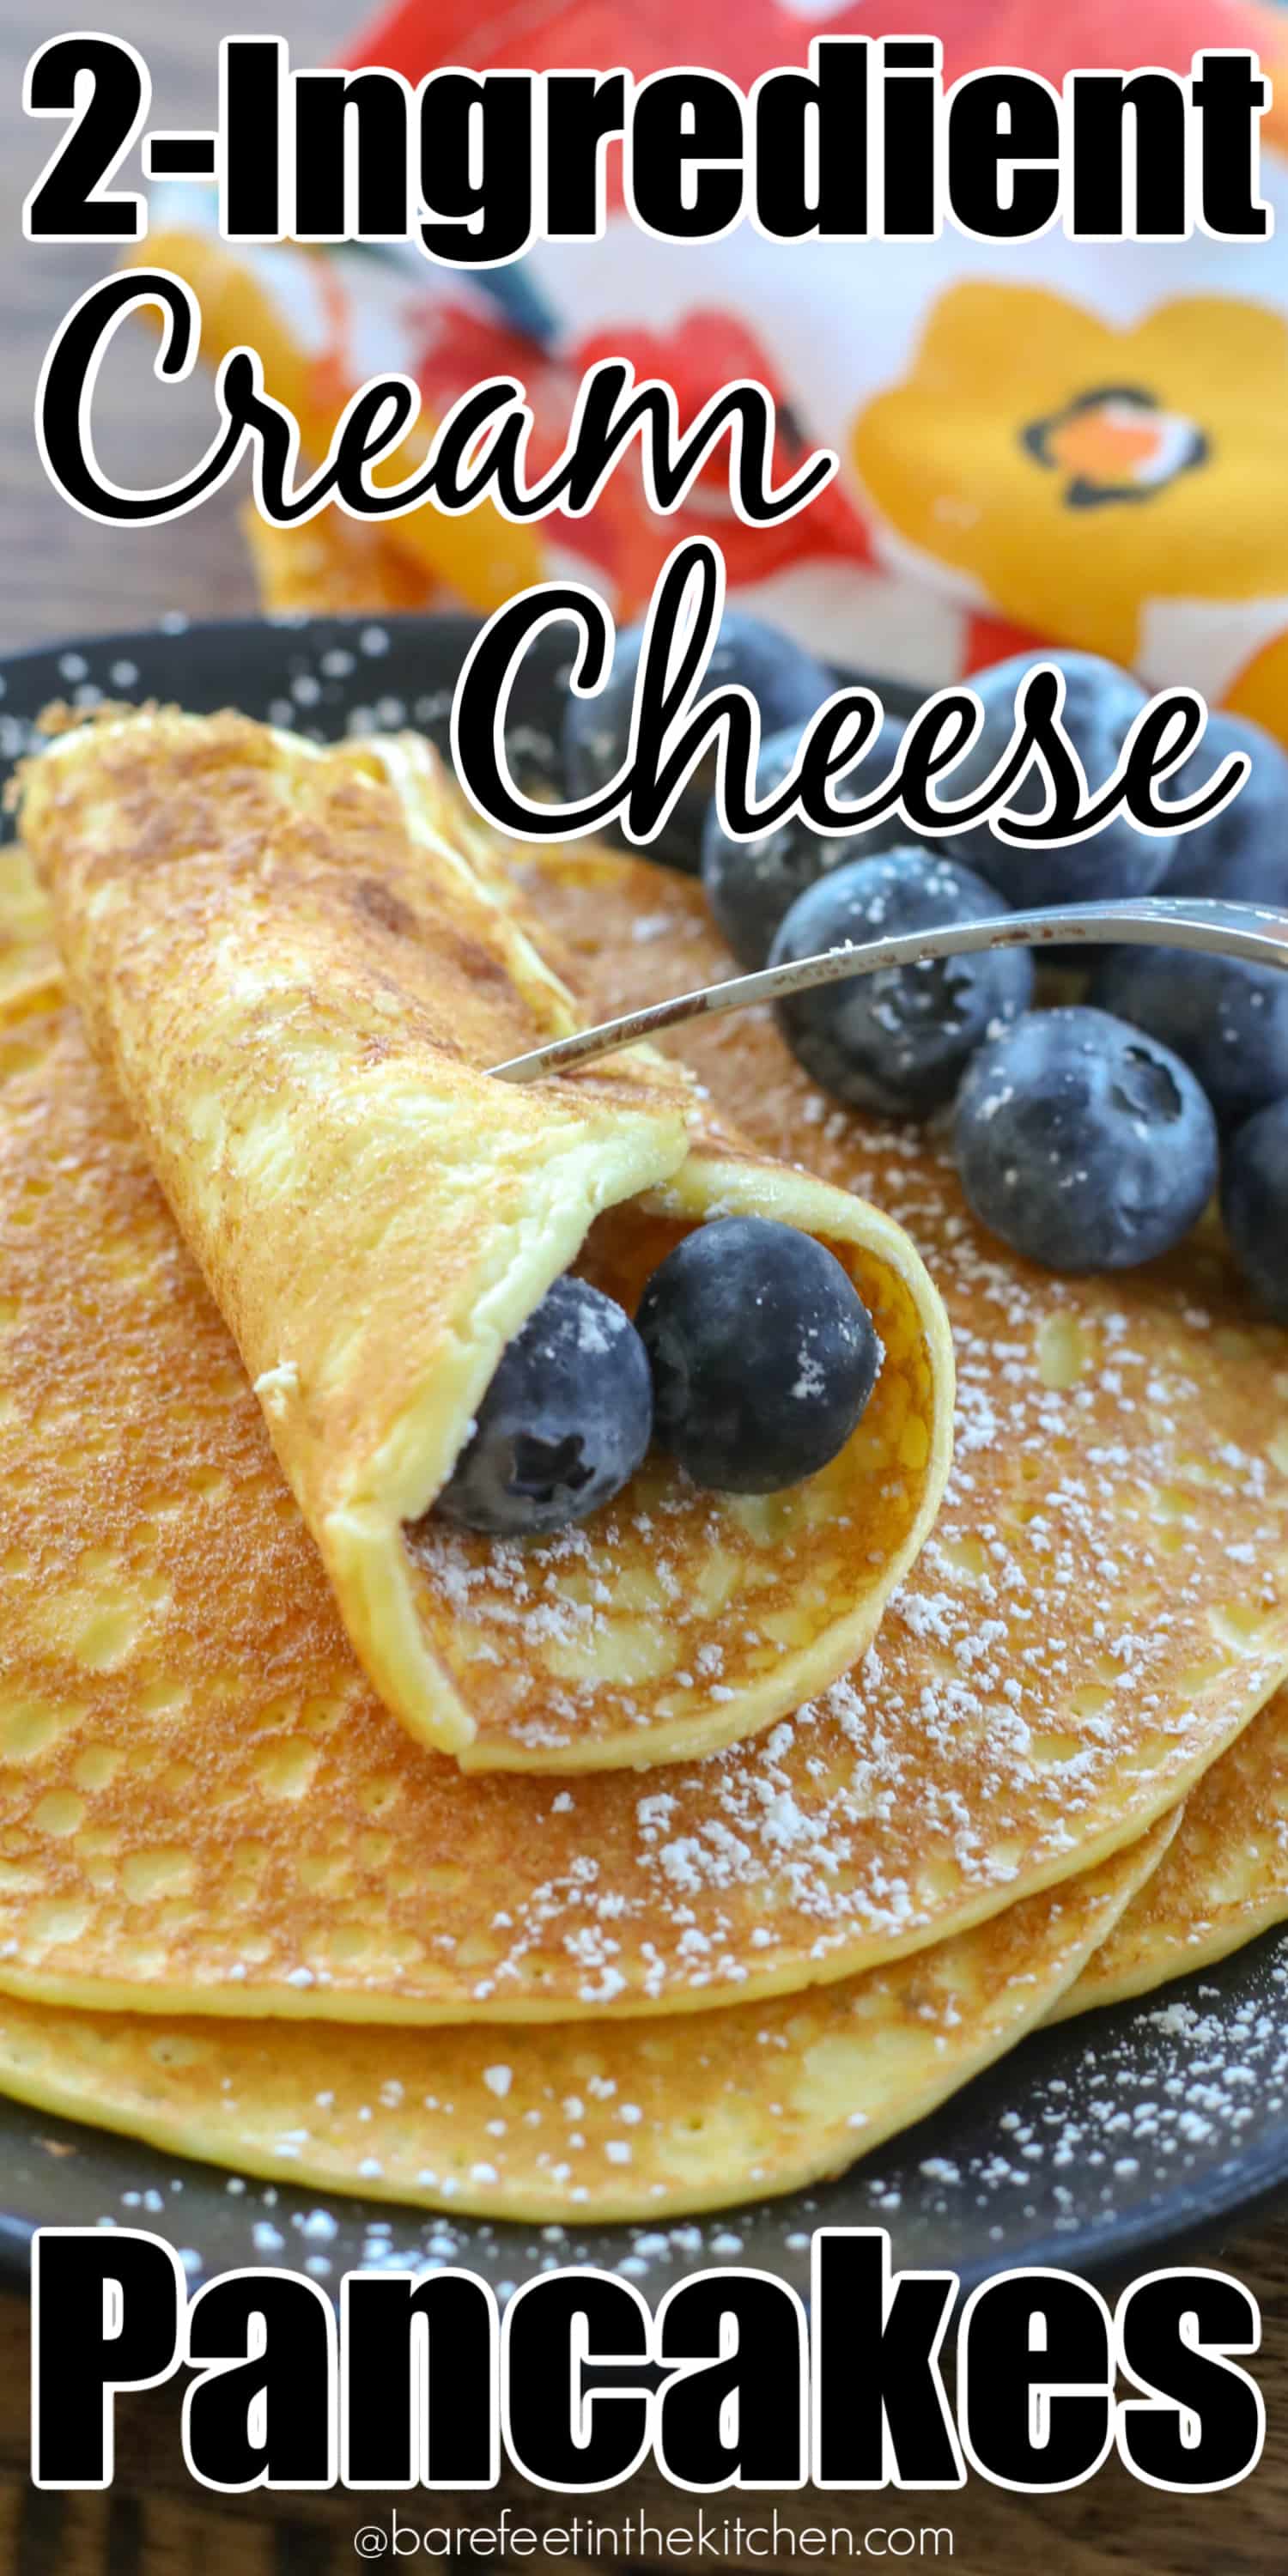 Thick And Fluffy American Pancakes - Sweetest Menu